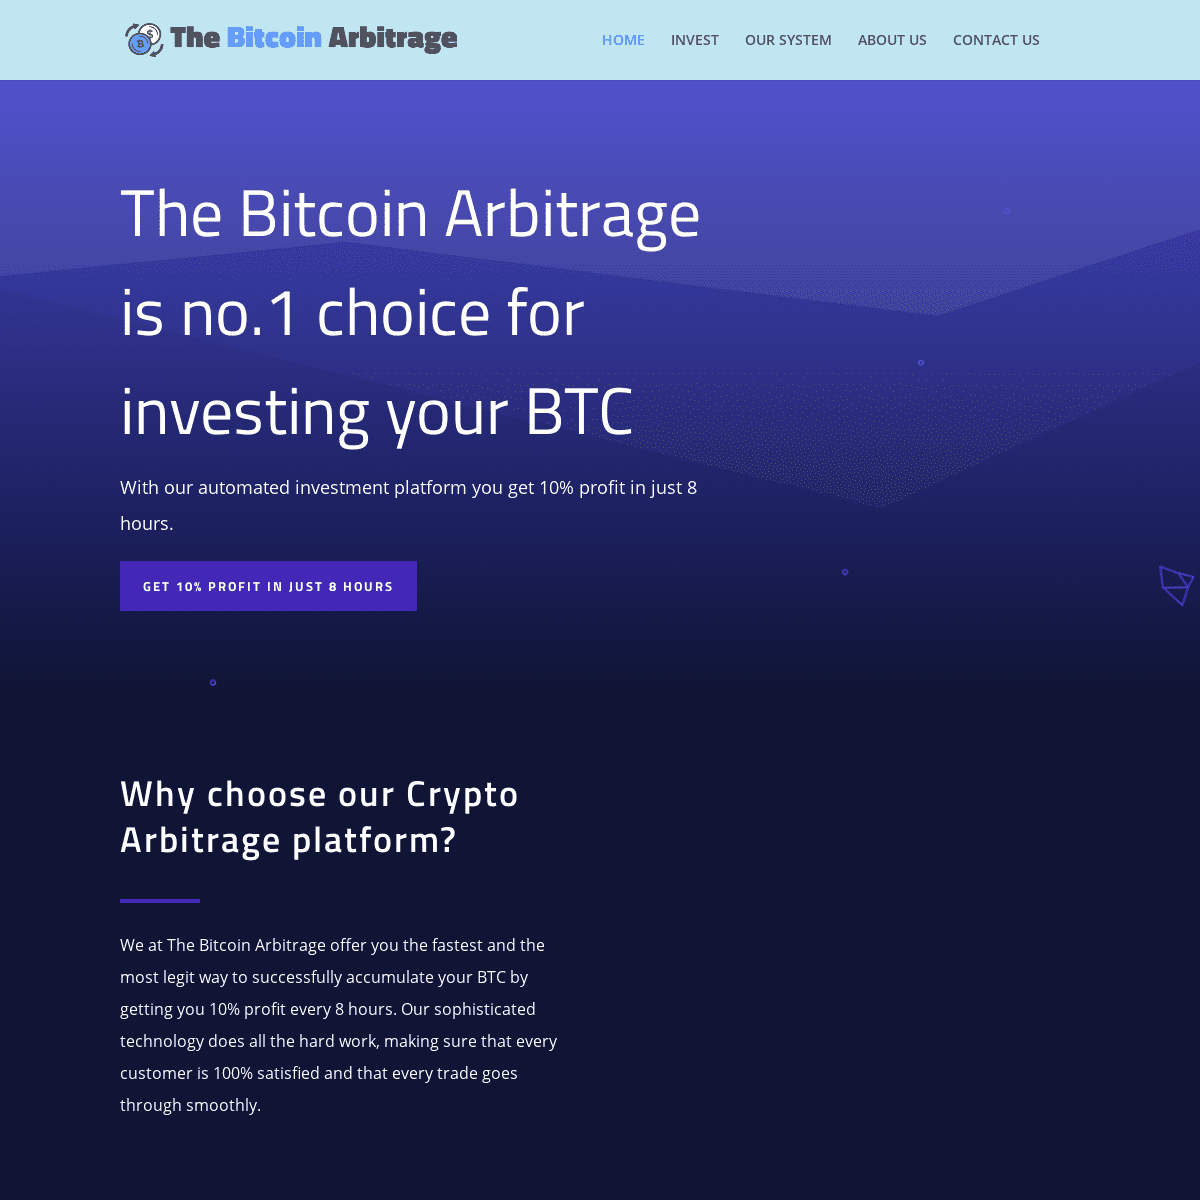 A complete backup of https://thebitcoinarbitrage.com